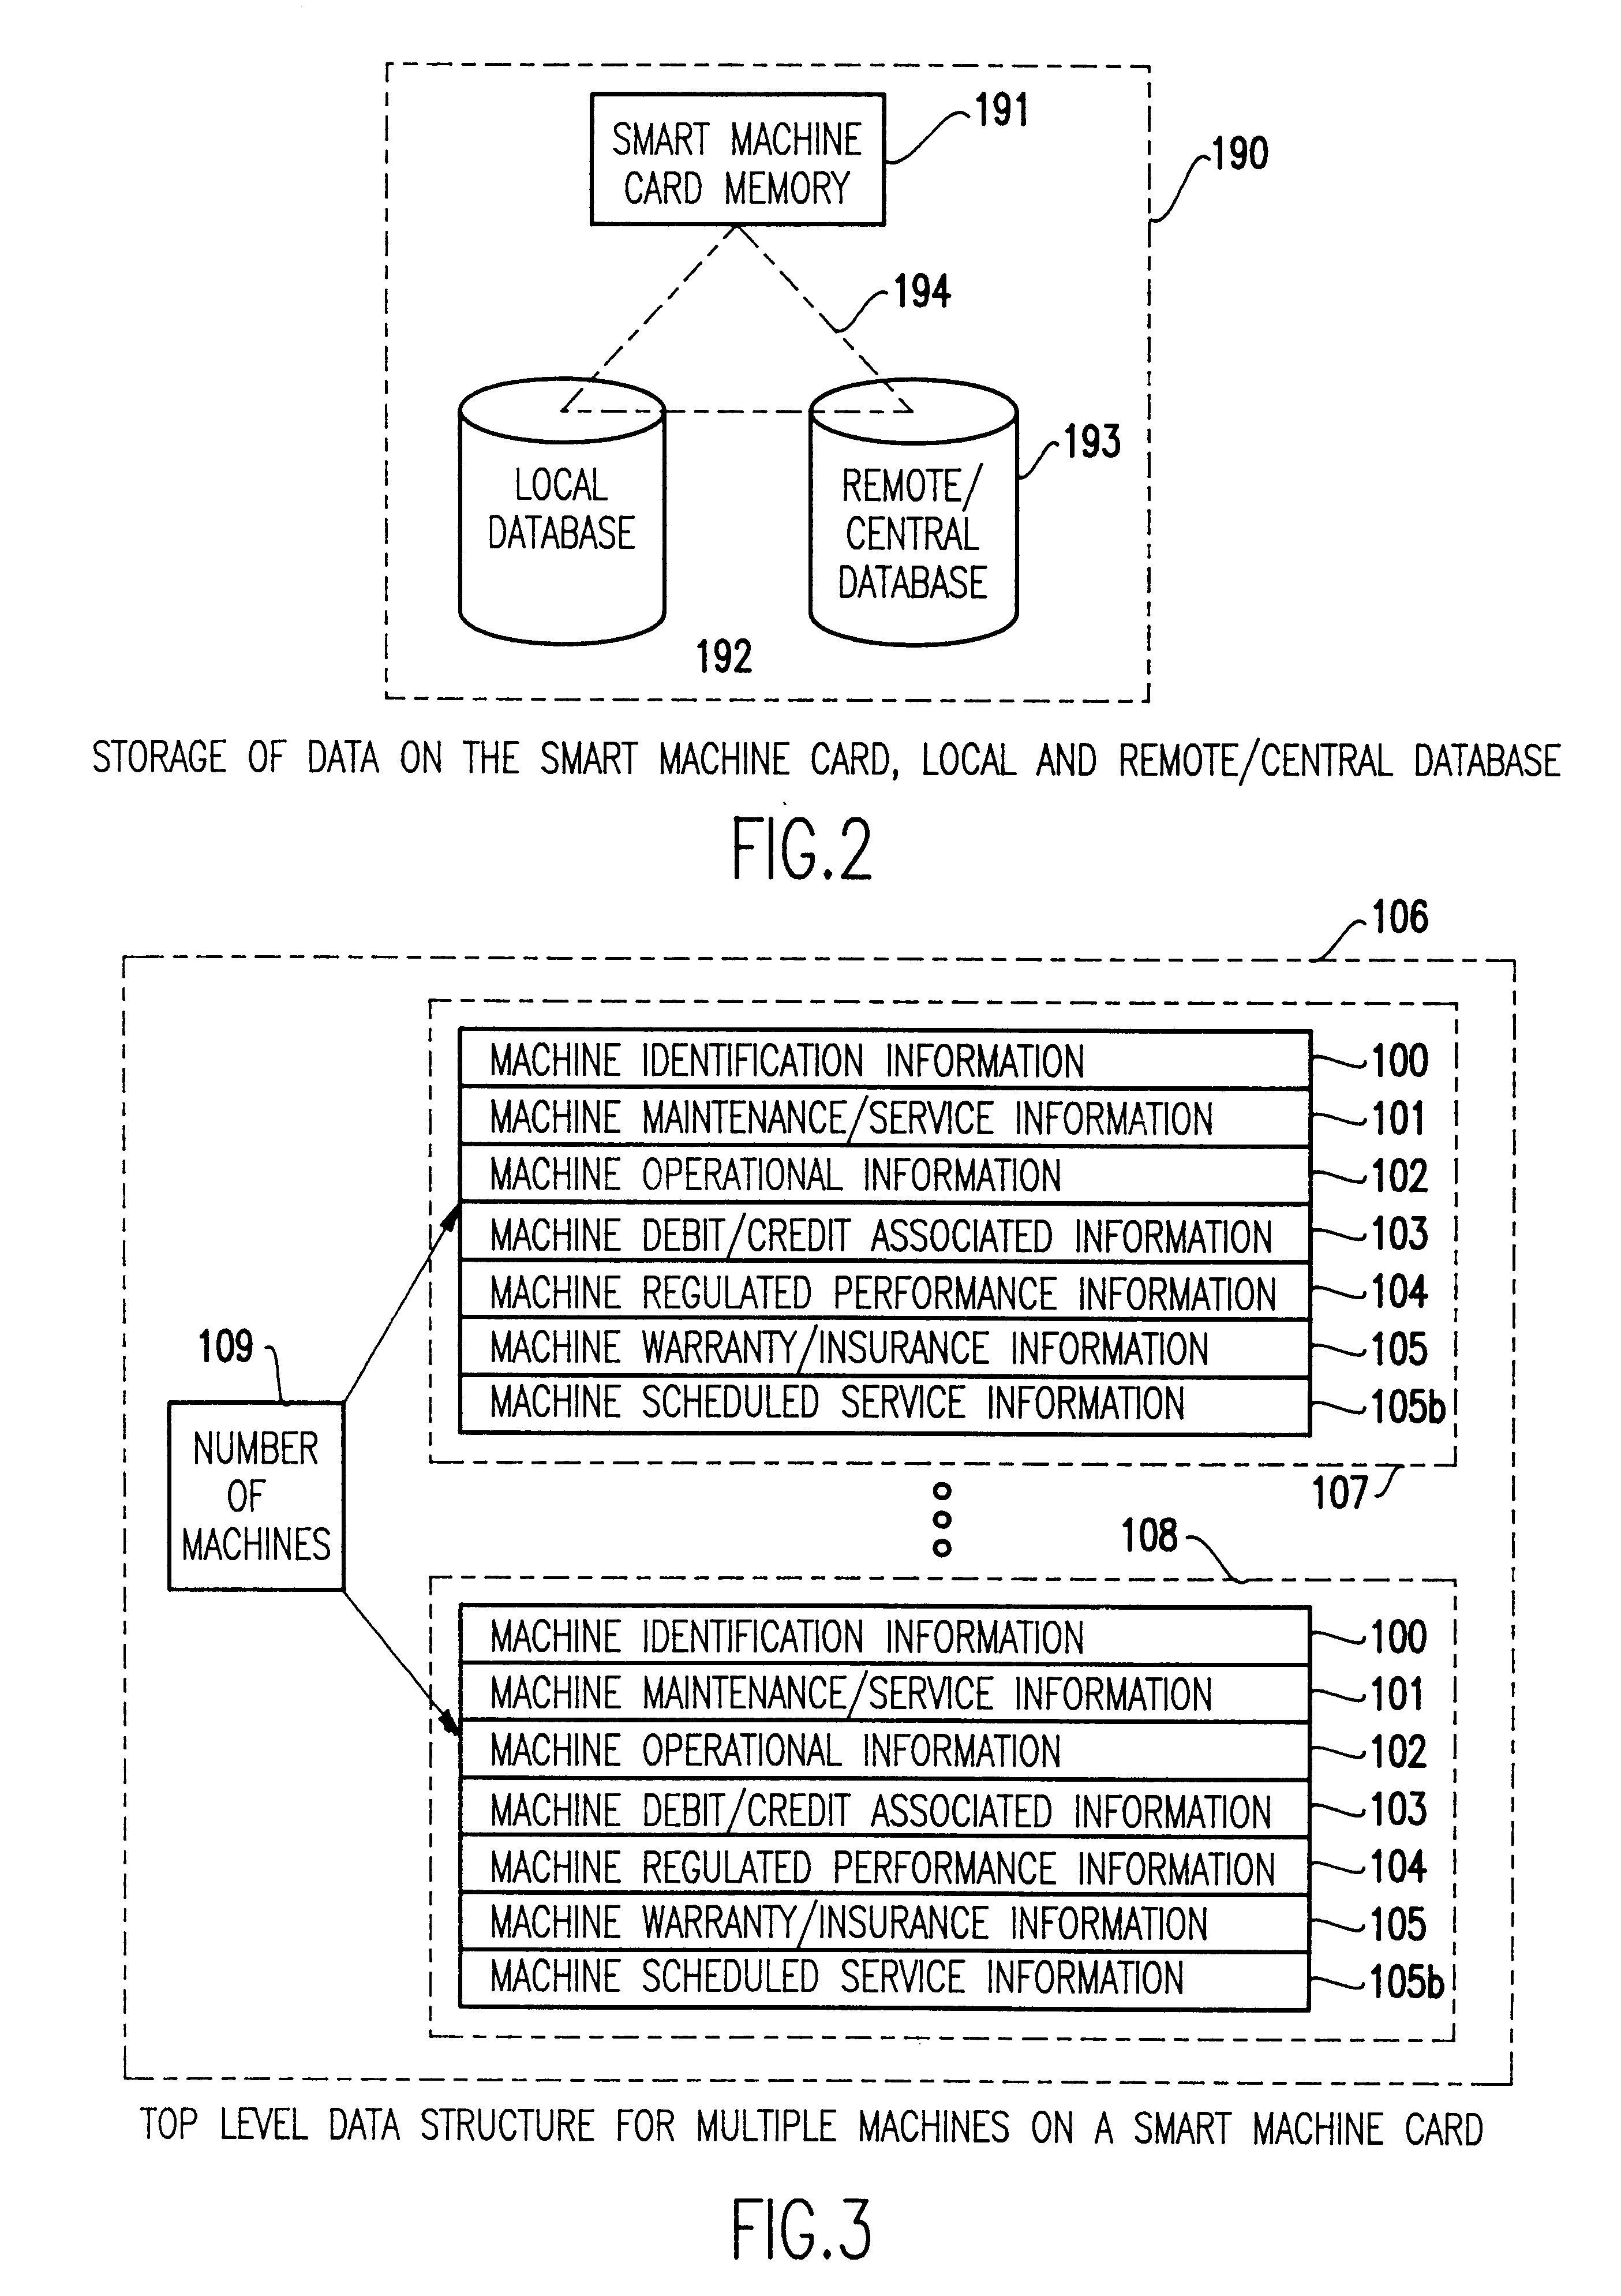 Method for using a smart card for recording operations, service and maintenance transactions and determining compliance of regulatory and other scheduled events